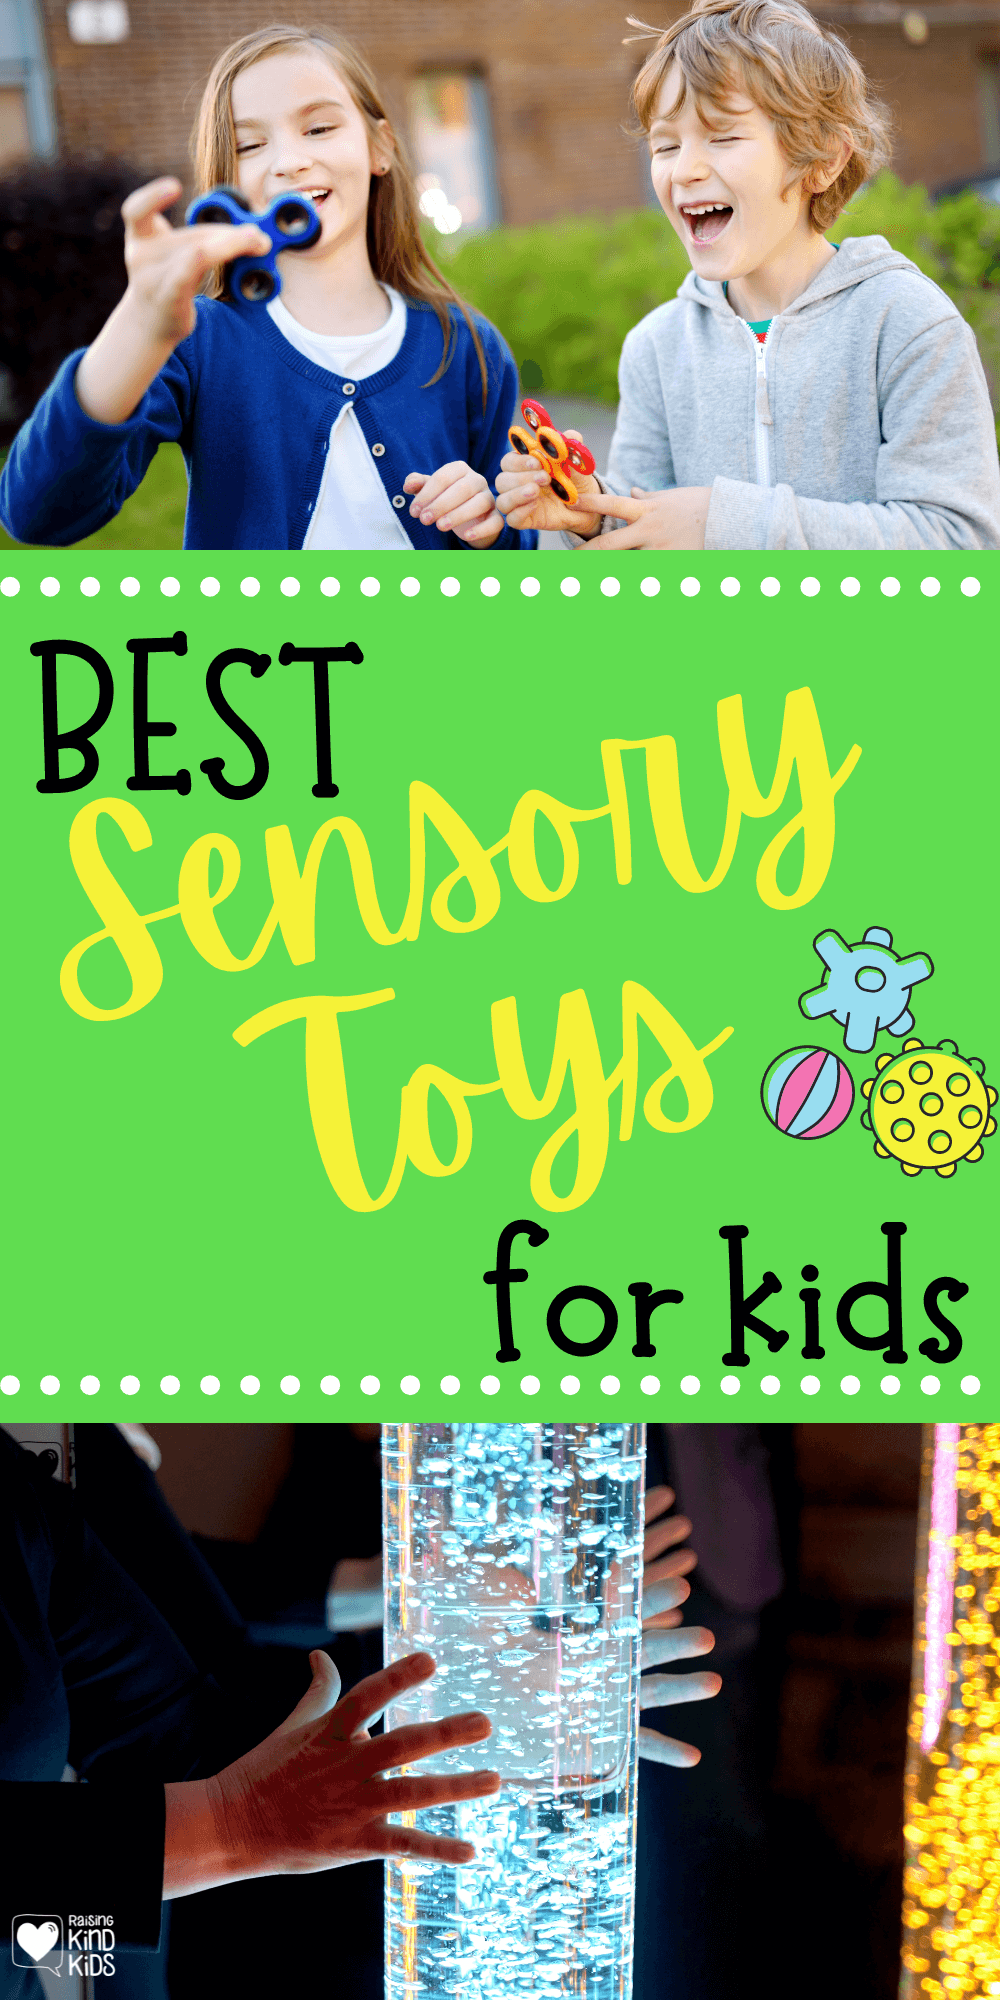 Best sensory toys and gifts for kids who are sensory seeking or who have spd (sensory processing disorder)